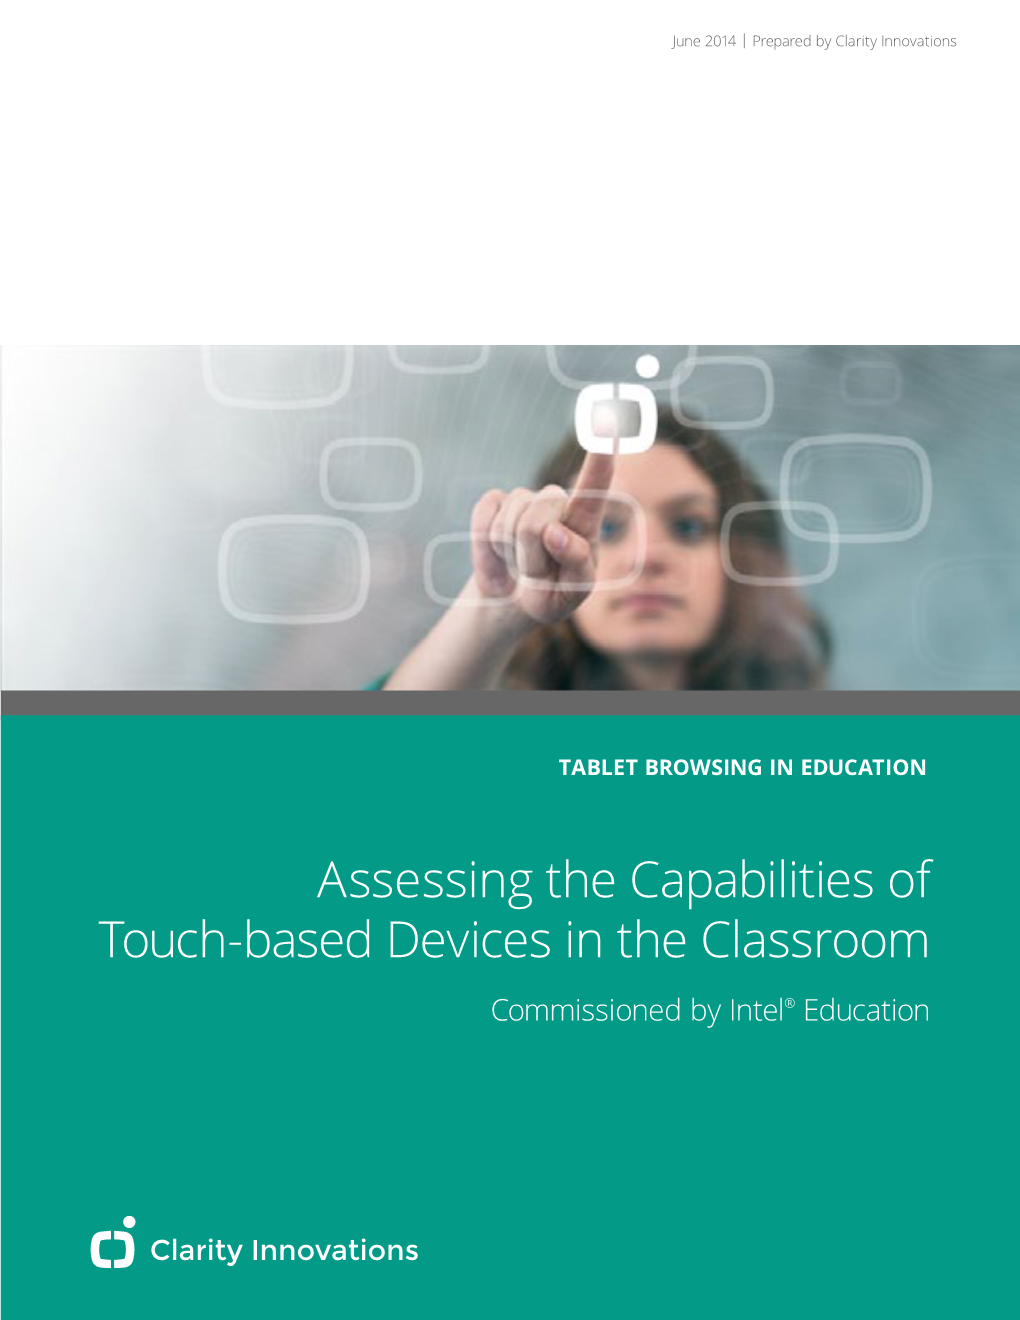 Assessing the Capabilities of Touch-Based Devices in the Classroom Commissioned by Intel® Education TABLET BROWSING in EDUCATION